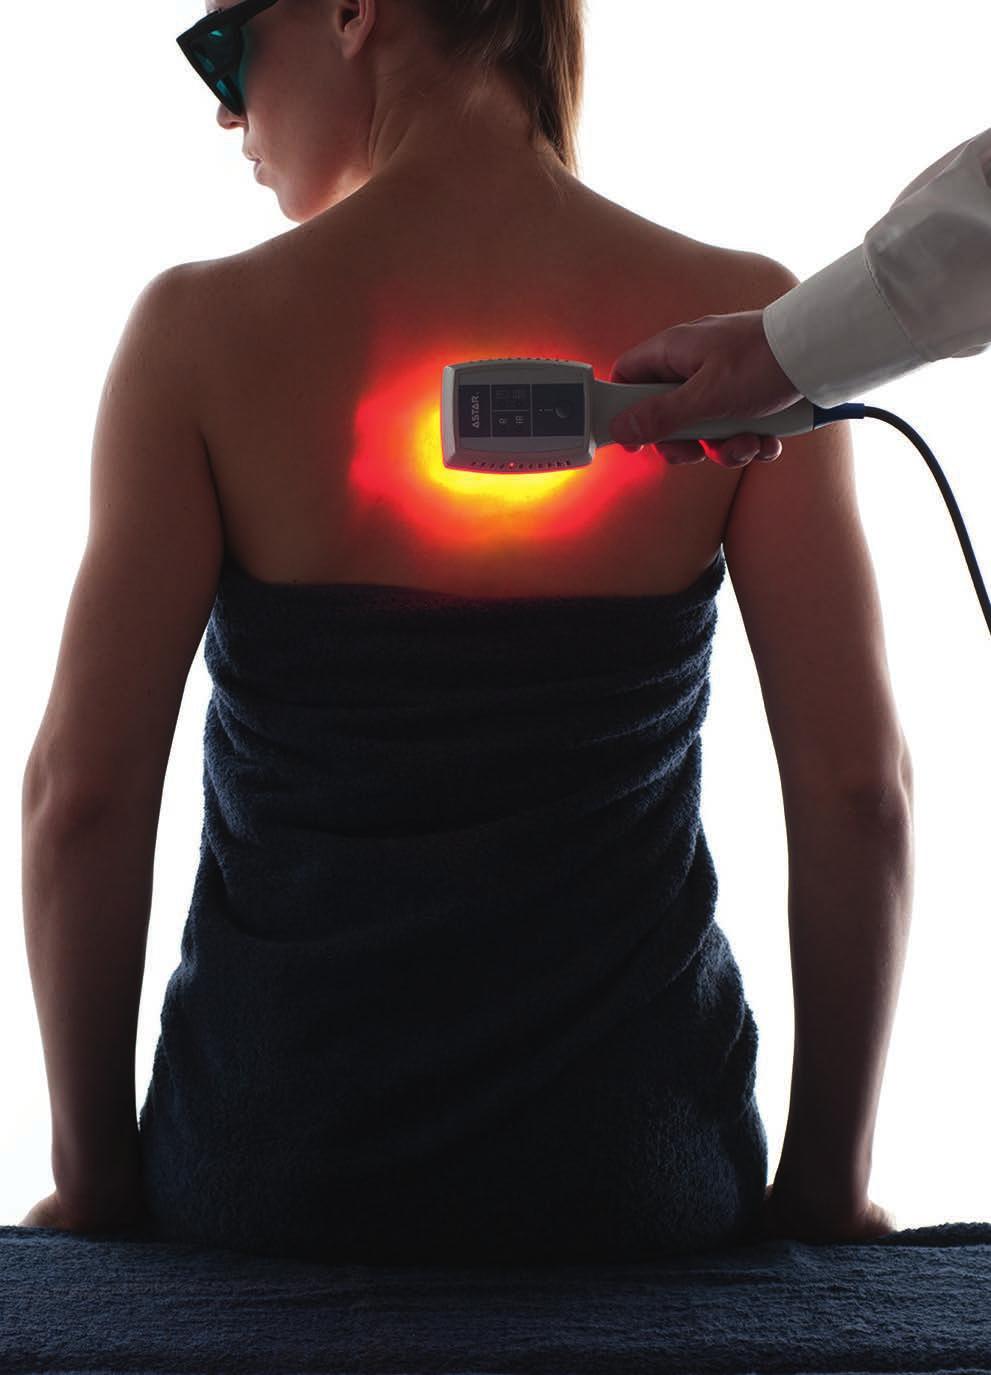 Multifunctional unit found its application in electrotherapy, ultrasound therapy, combined therapy, laser therapy and locally focused magnetotherapy.